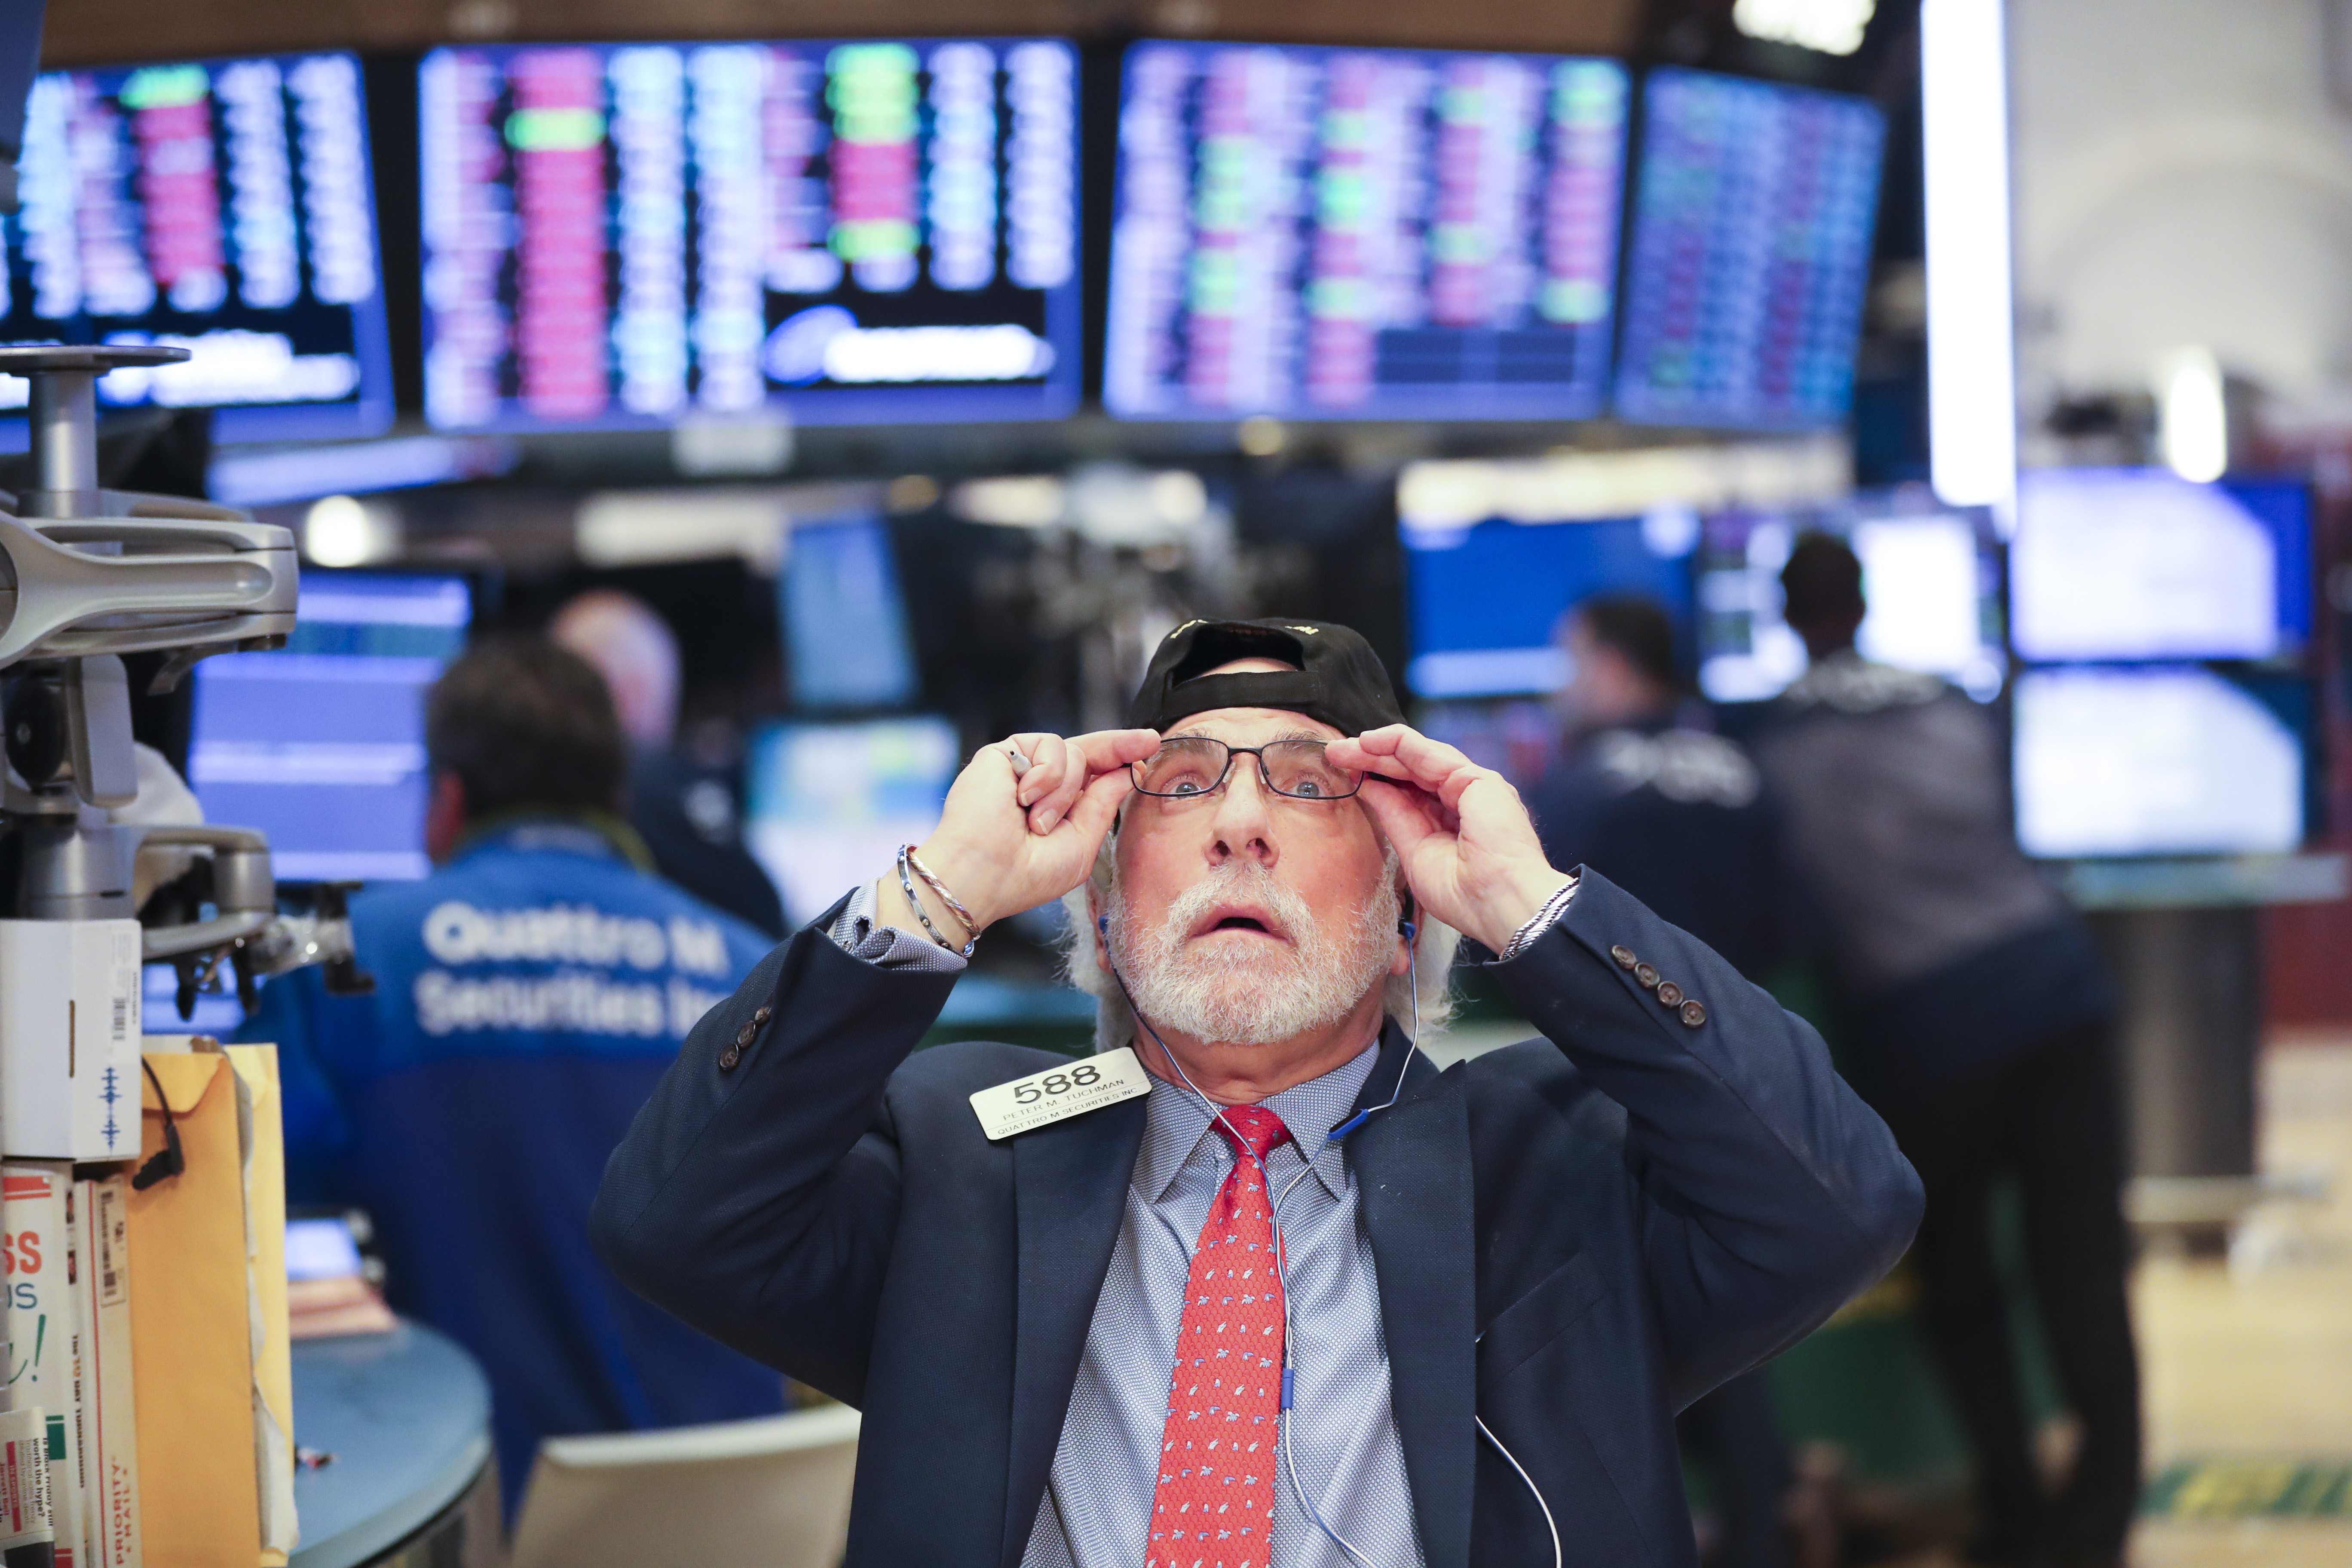 Recent volatility in equity markets underscores the role of bonds in a balanced portfolio both as a way of generating modest total returns and importantly, as a means of hedging and diversifying risk, writes John Woods. Photo: Xinhua